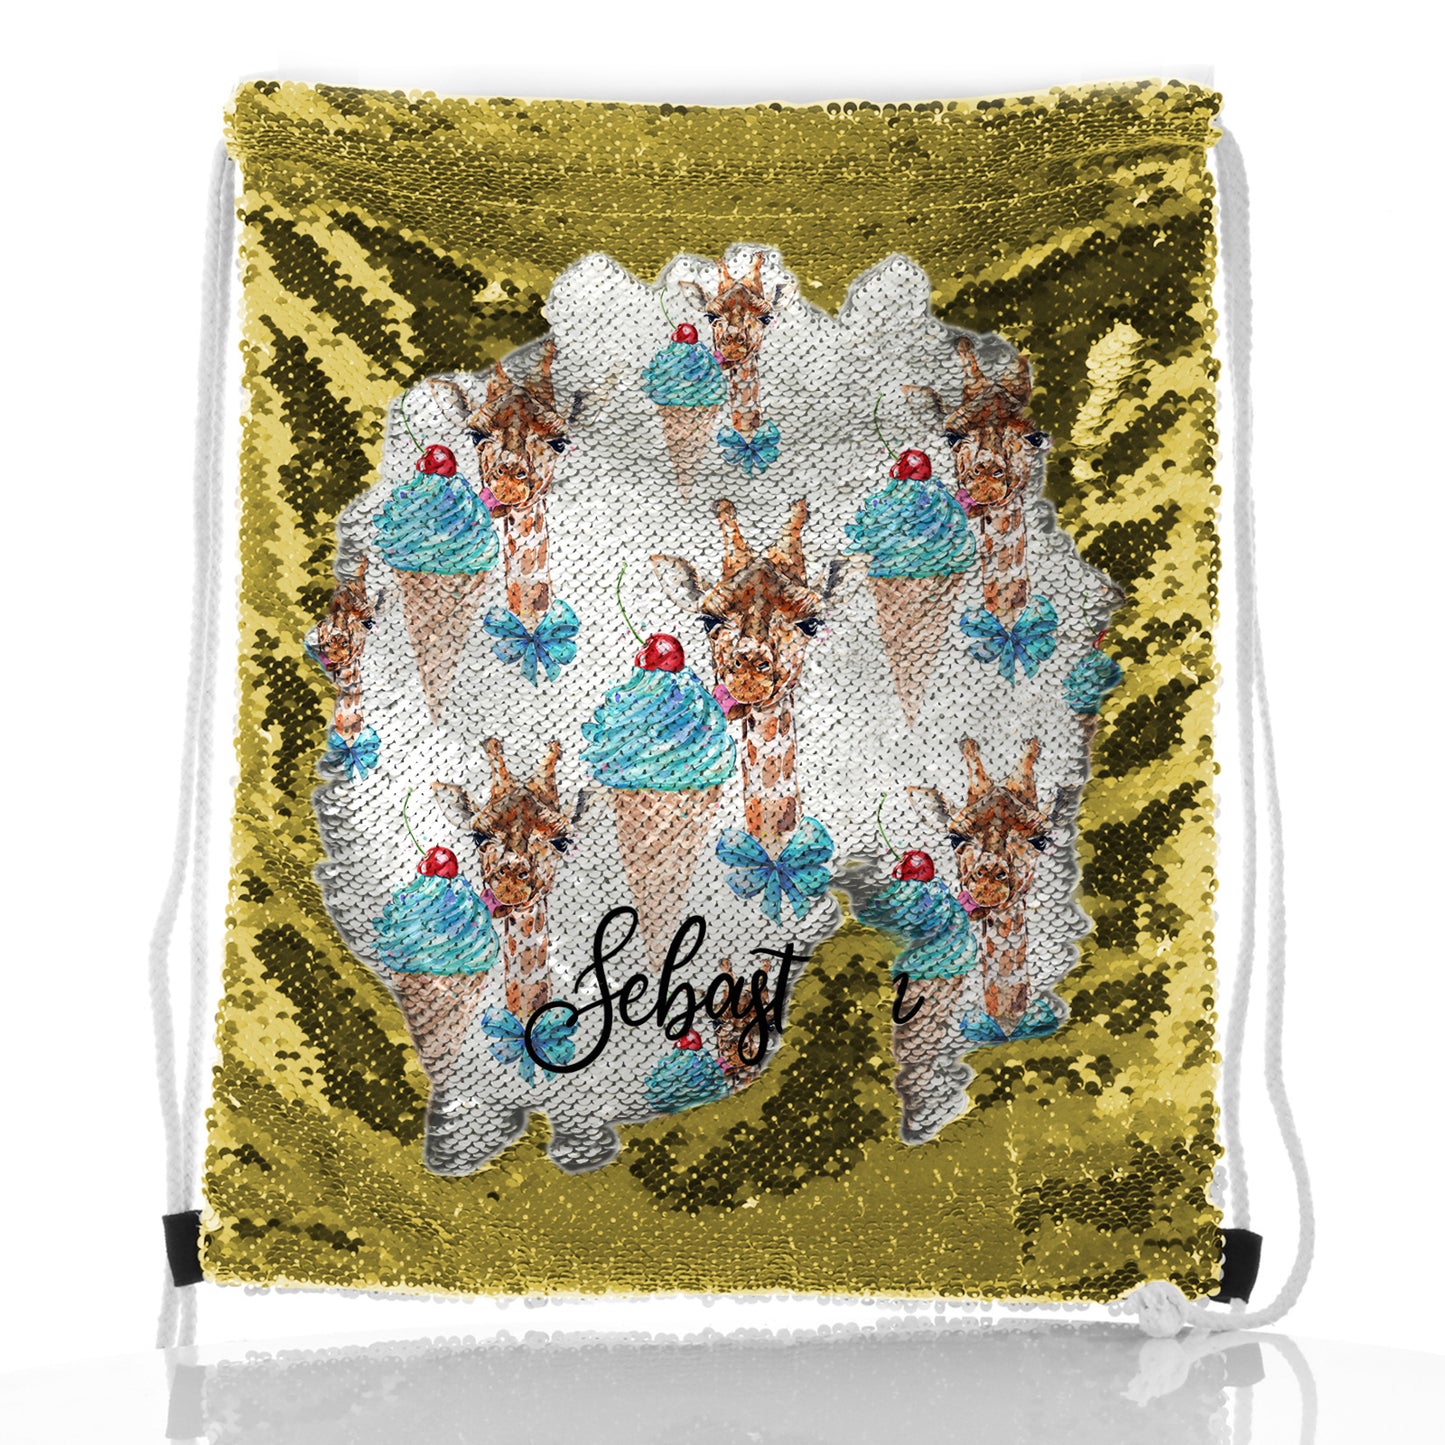 Personalised Sequin Drawstring Backpack with Giraffe Blue Ice creams and Cute Text